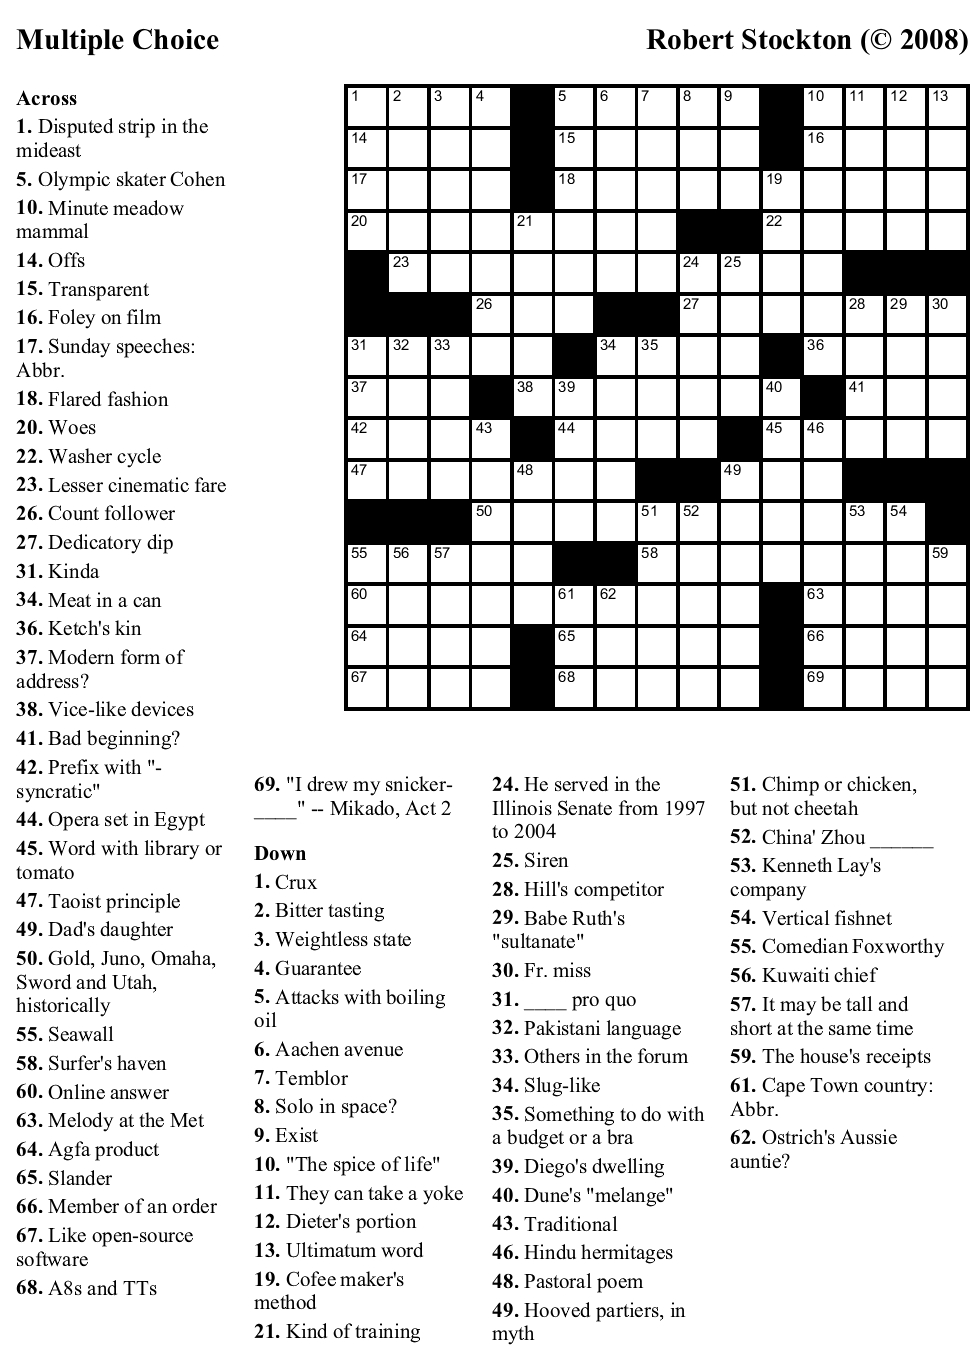 Pinjim Fraunberger On Crossword Puzzles | Printable Crossword - Printable Newspaper Crossword Puzzles For Free